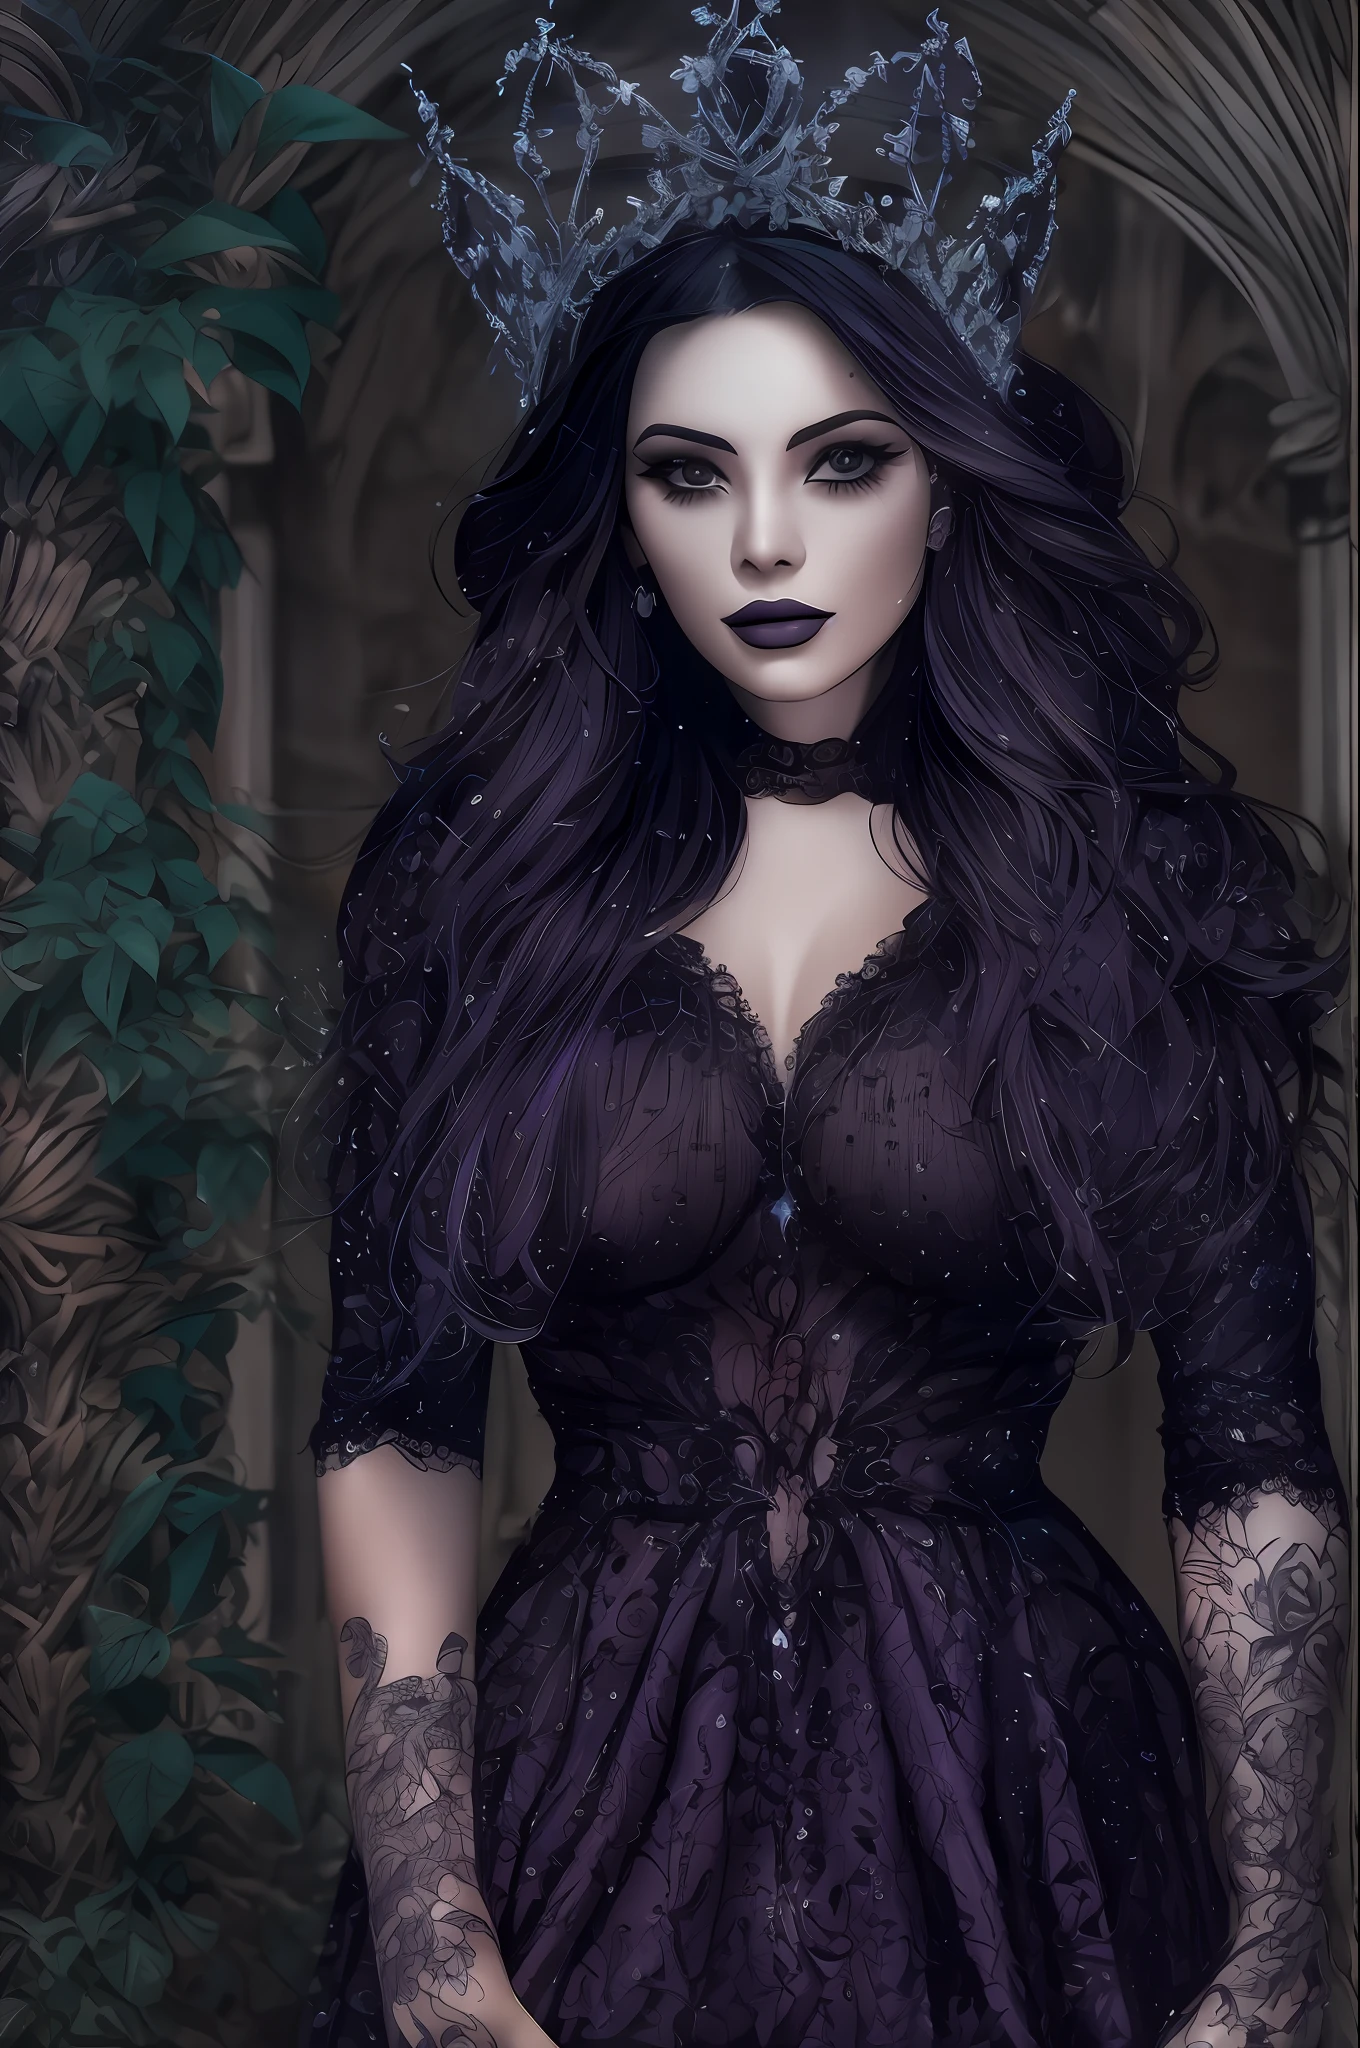 beautiful tattooed woman, short black hair, fully body, Gothic purple and black dress, black reindeer gloves, On his neck a crown of void, Gothic, very beautiful, highest quallity, 8k, in the background a dark forest, with illuminated butterflies